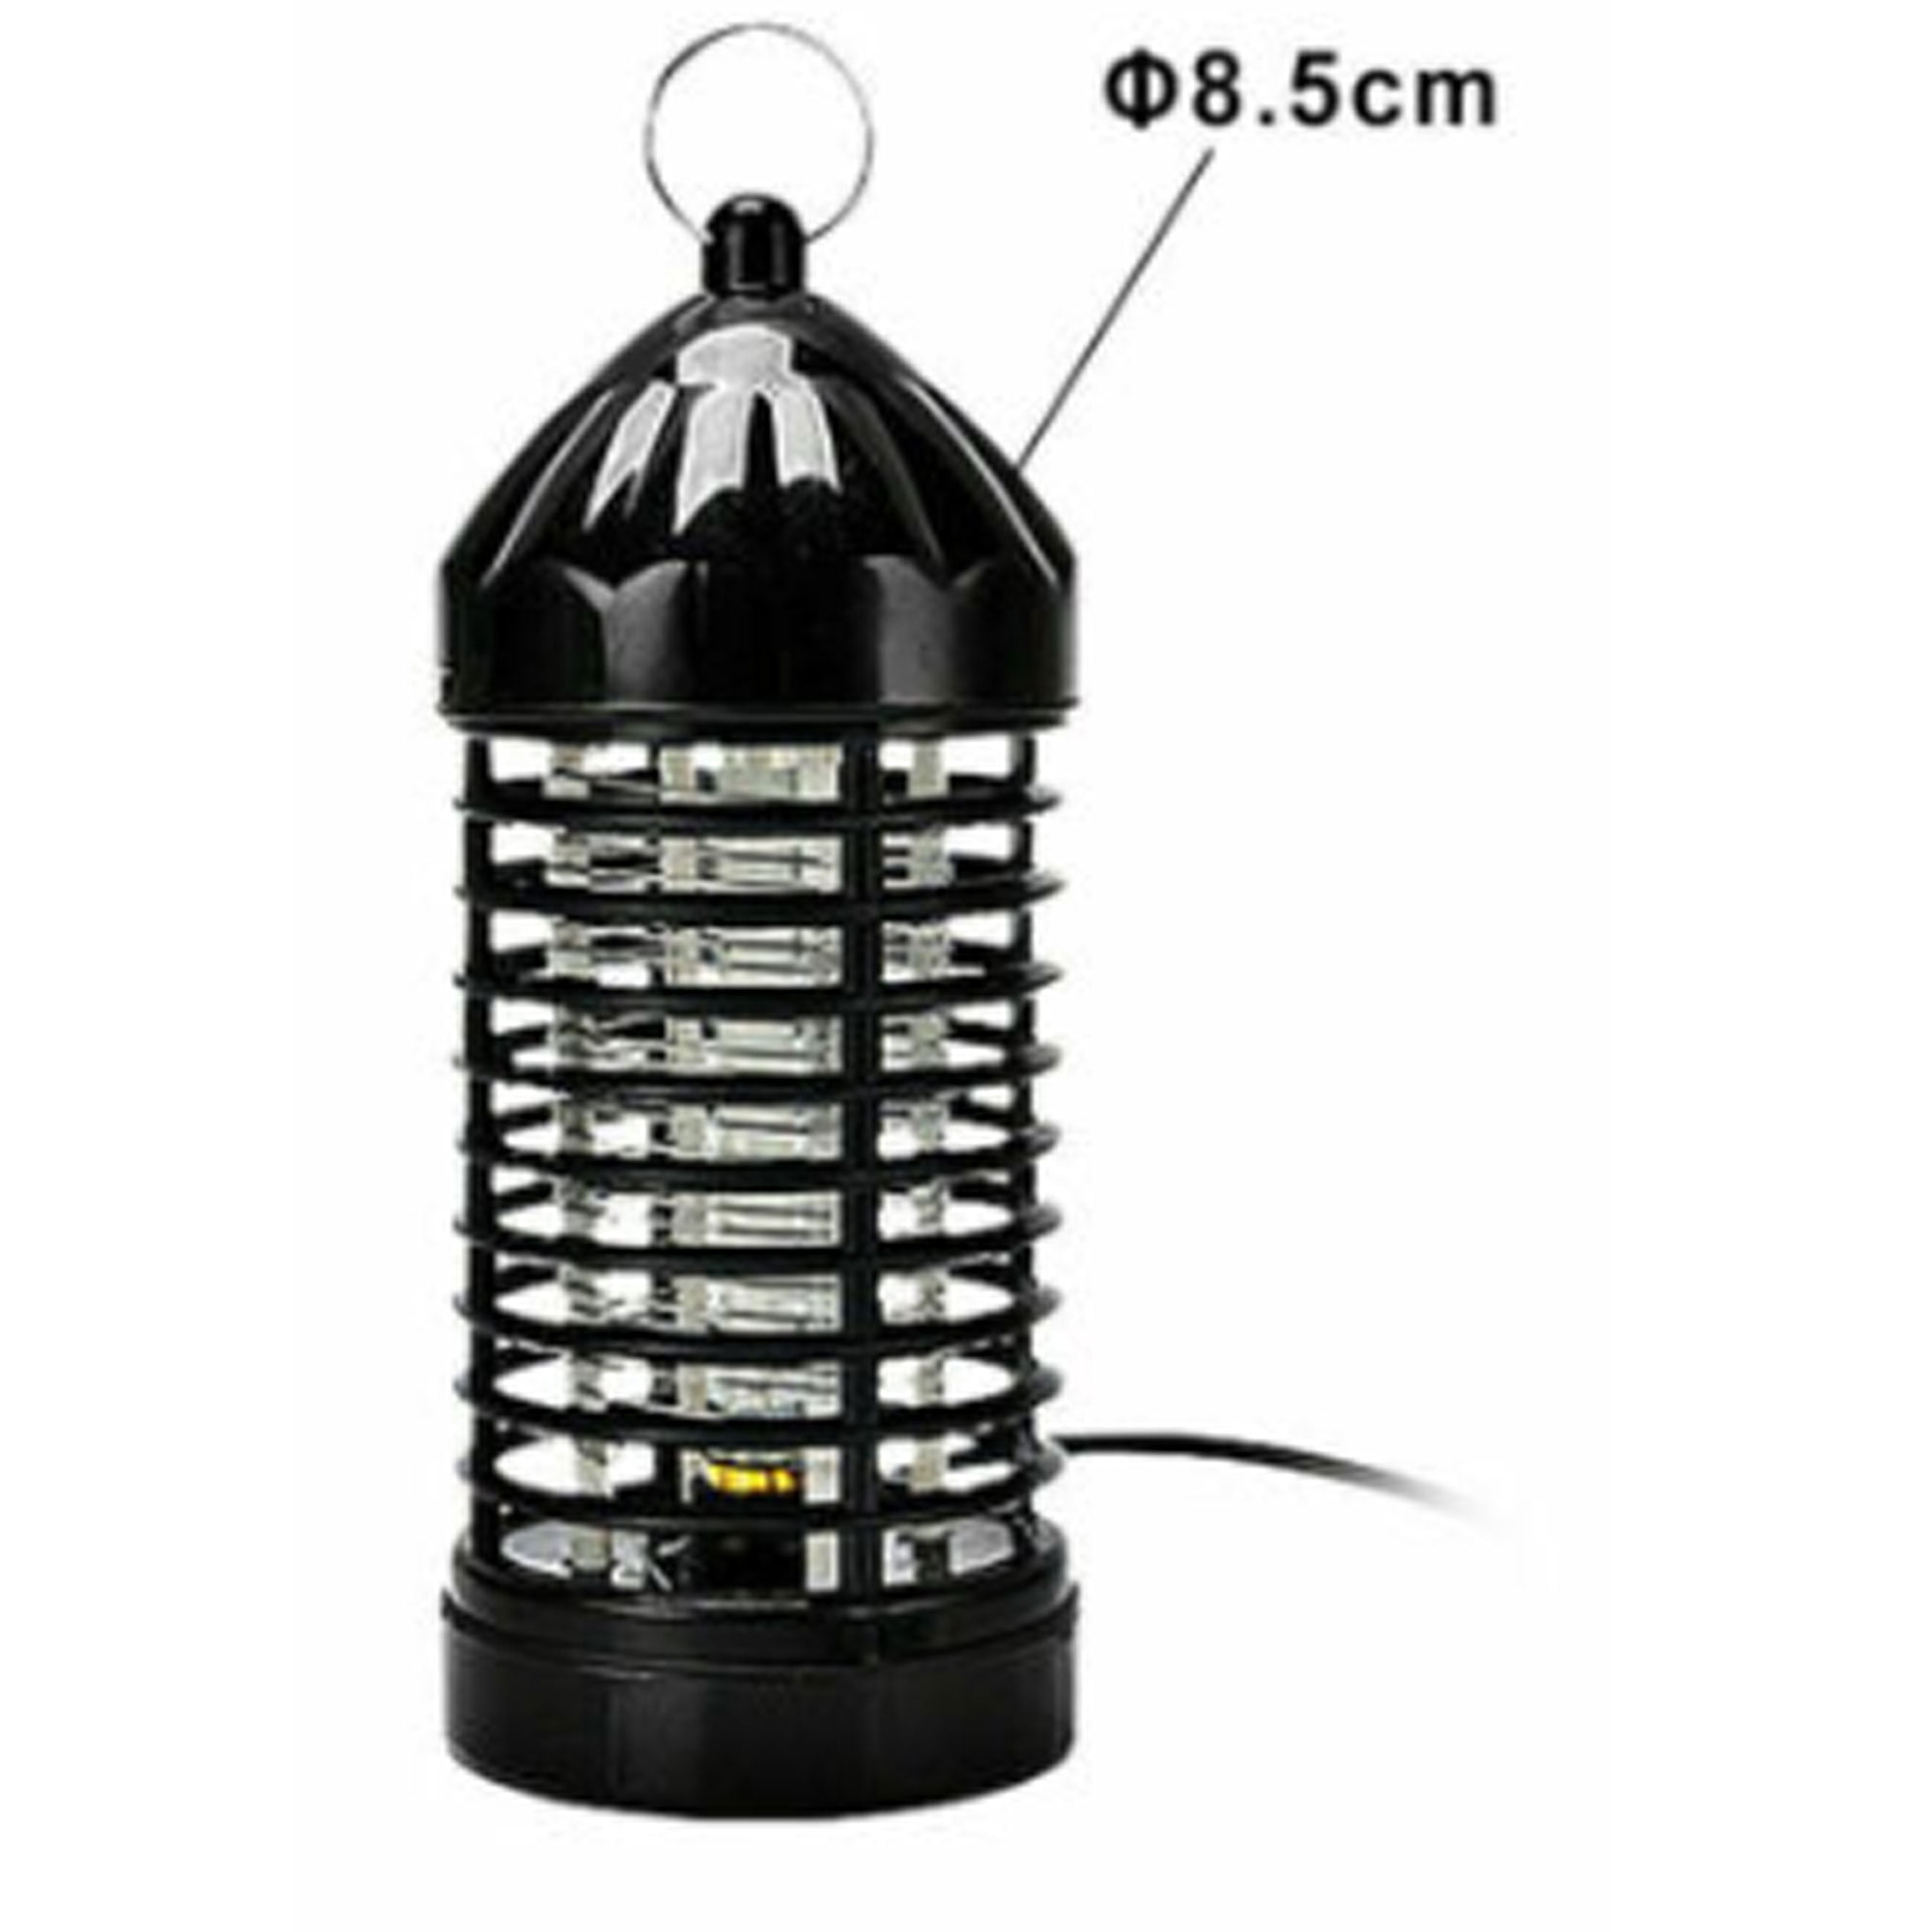 USB Mosquito Killer Lamp Insect Fly Bug Zapper Trap Pest LED Control UV Light FF 